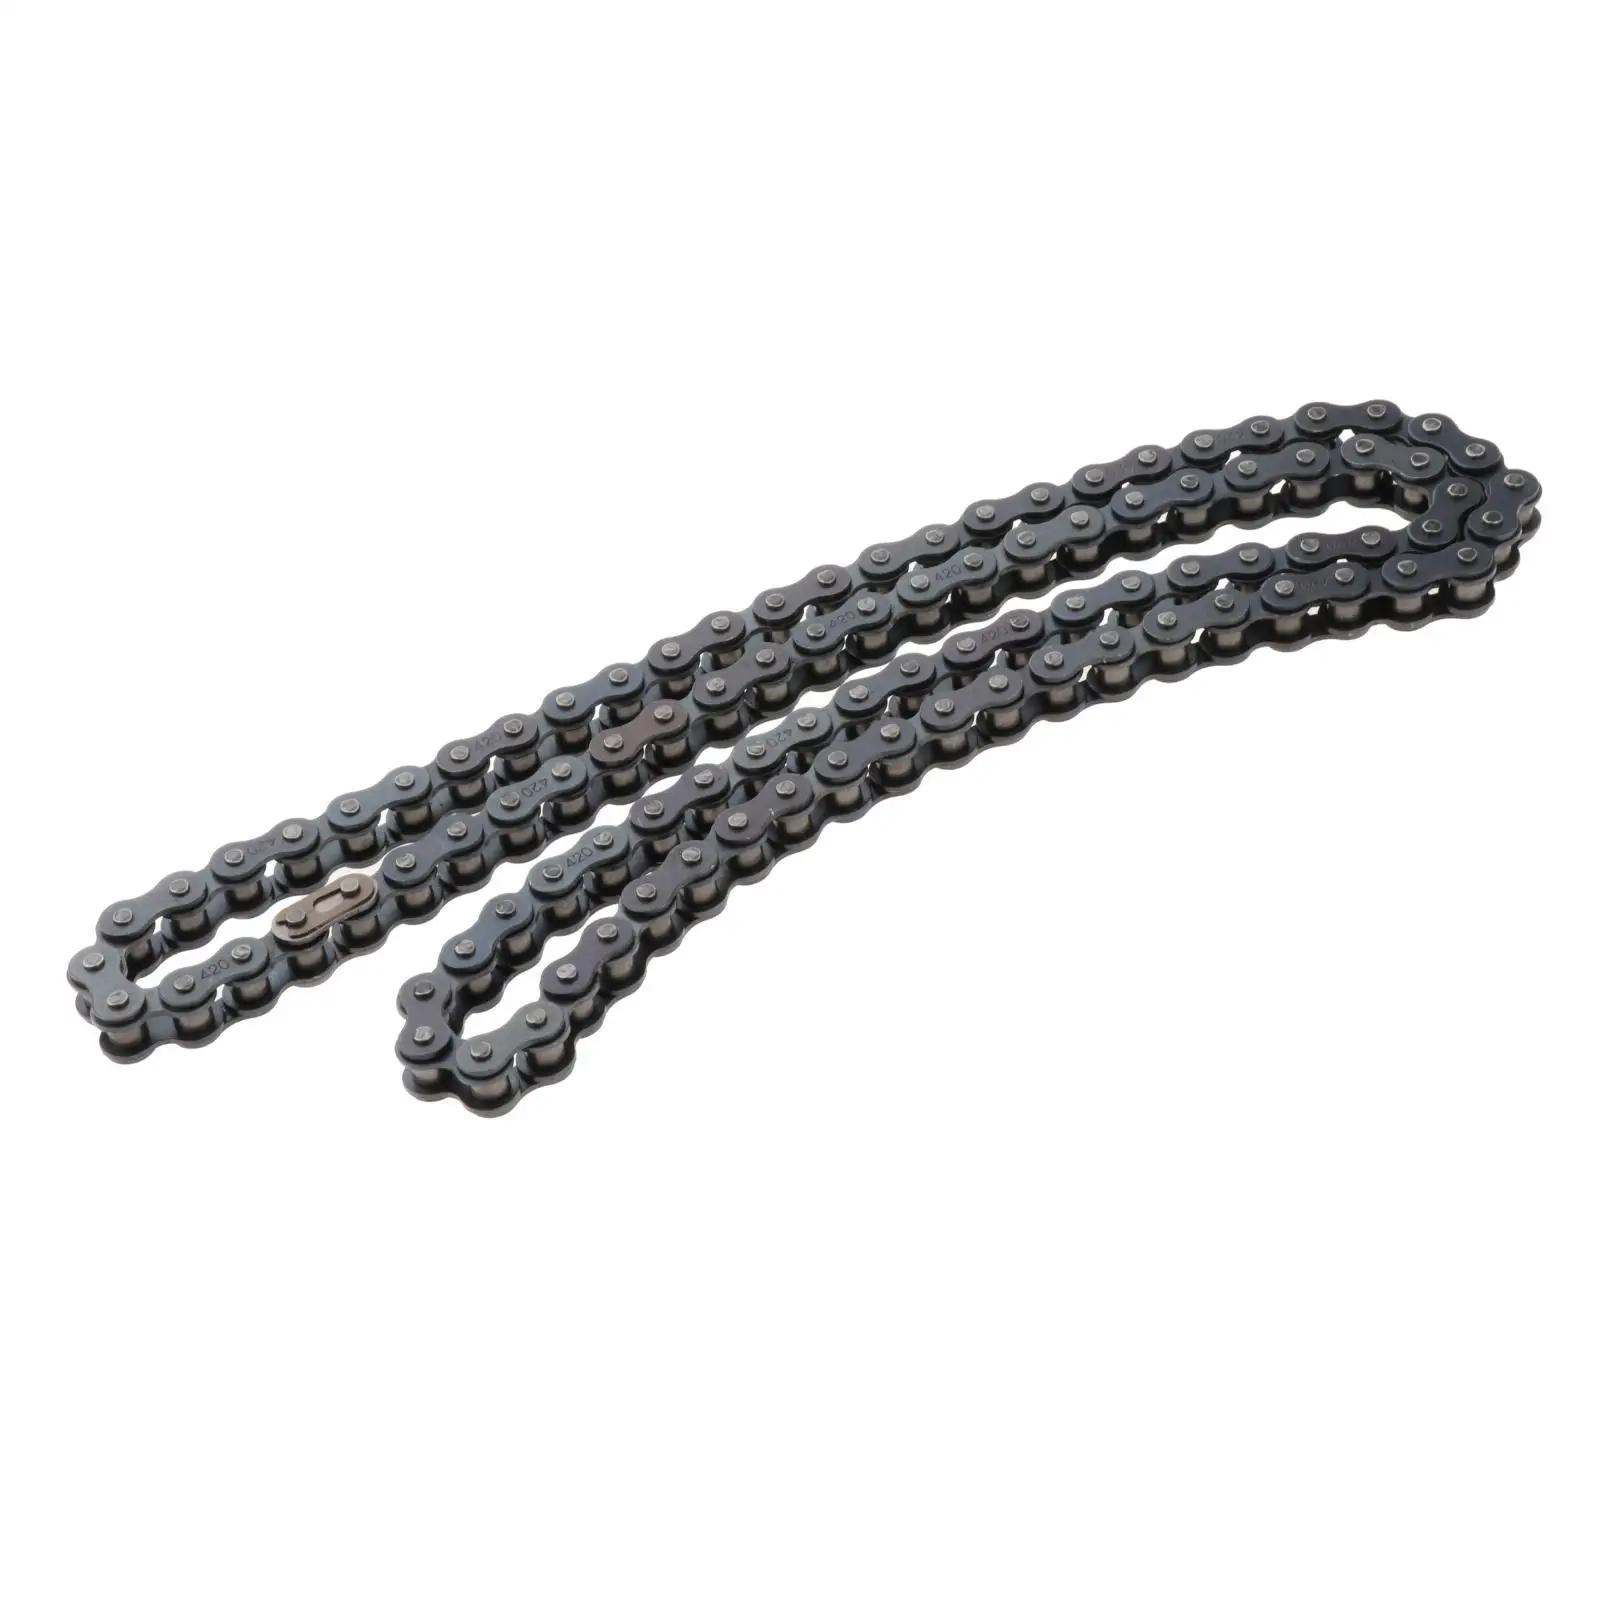 420 Motorcycle Chain 50-110Cc 96246L Accessory Spare Parts Drive Chain 420 Standard Roller Chain Fits  Motorcycle